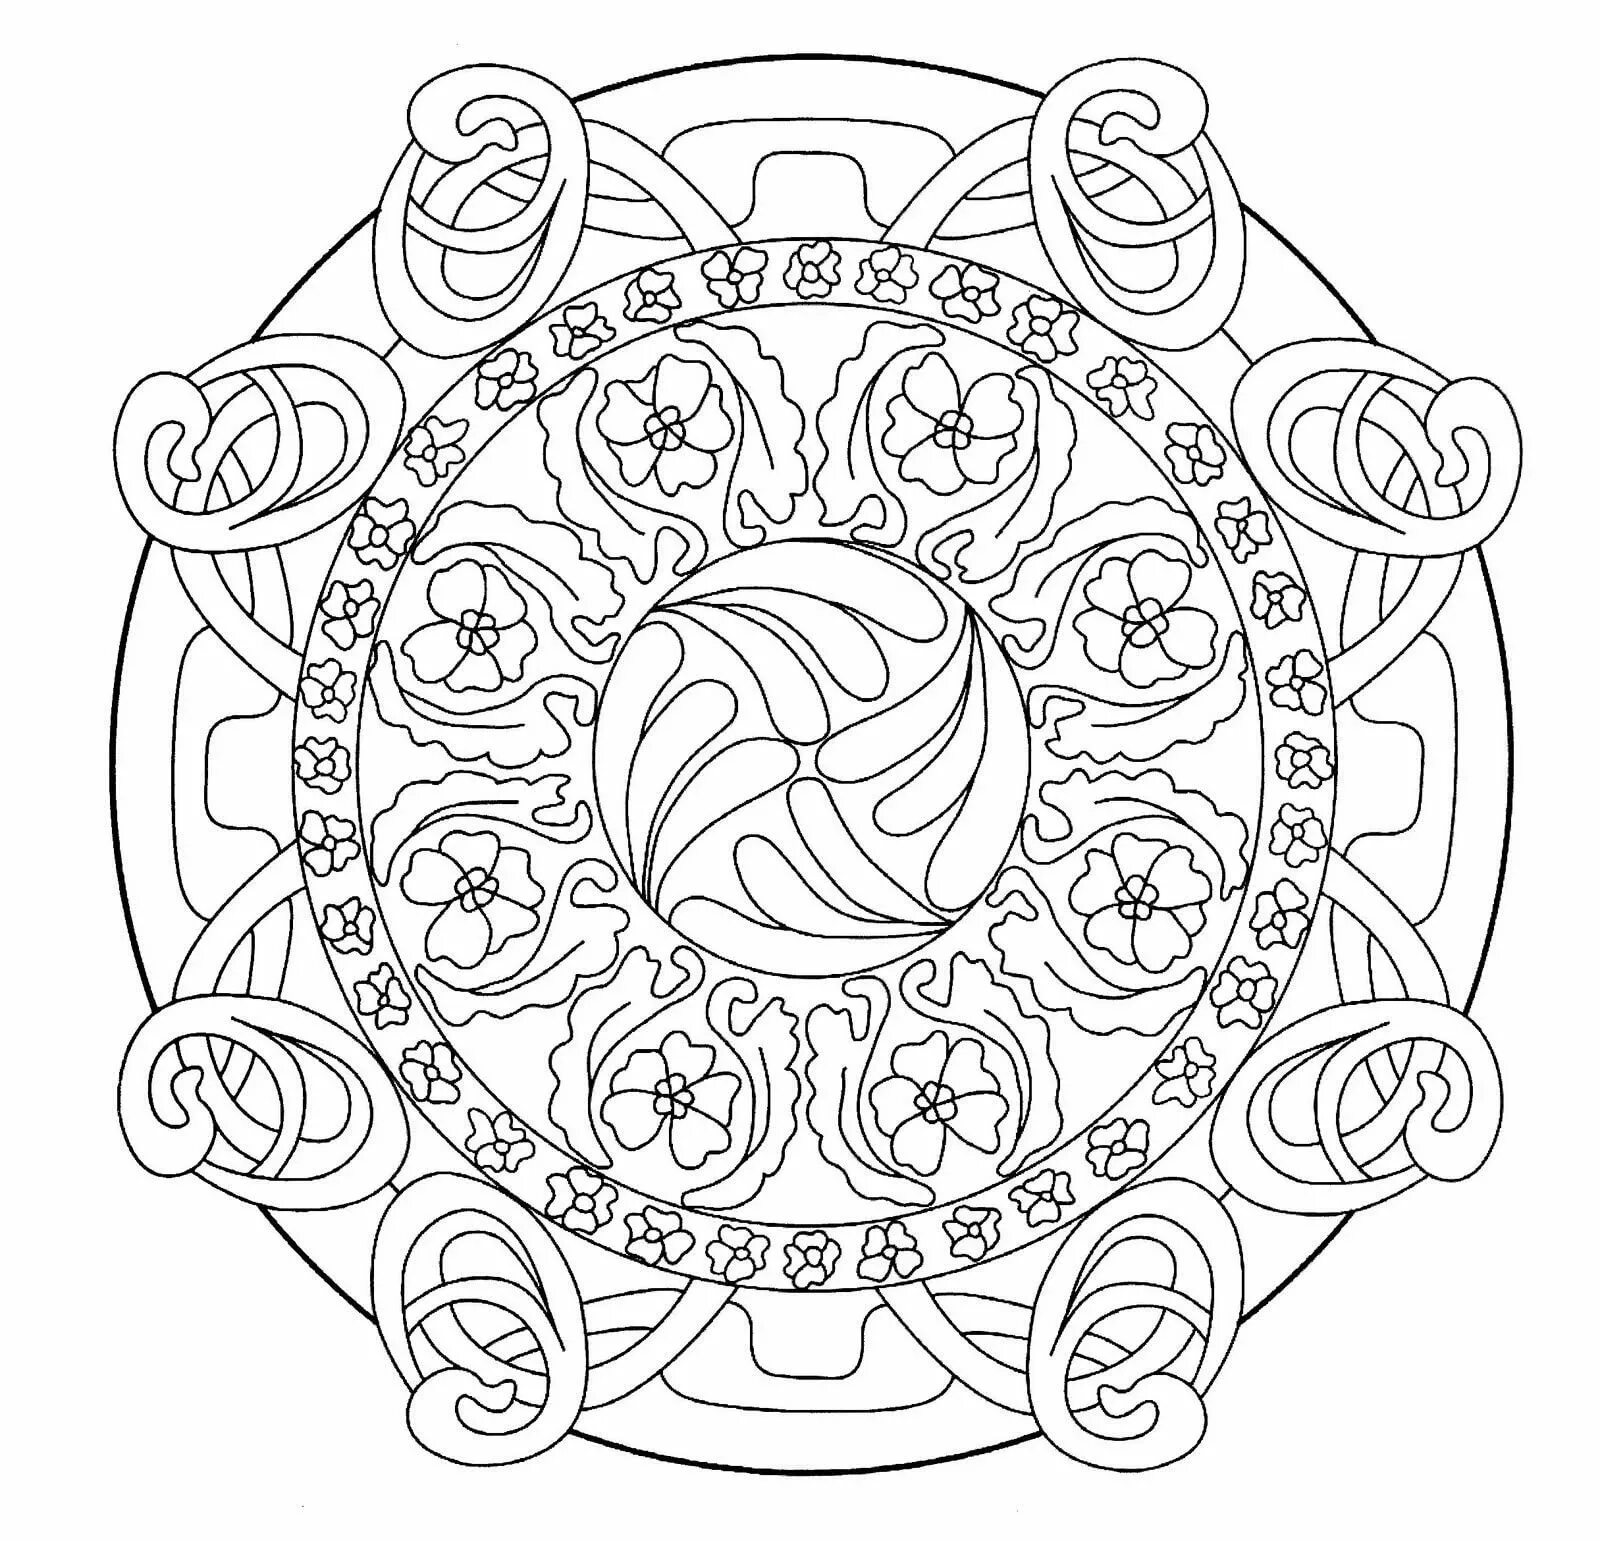 Encouragement mantra coloring page